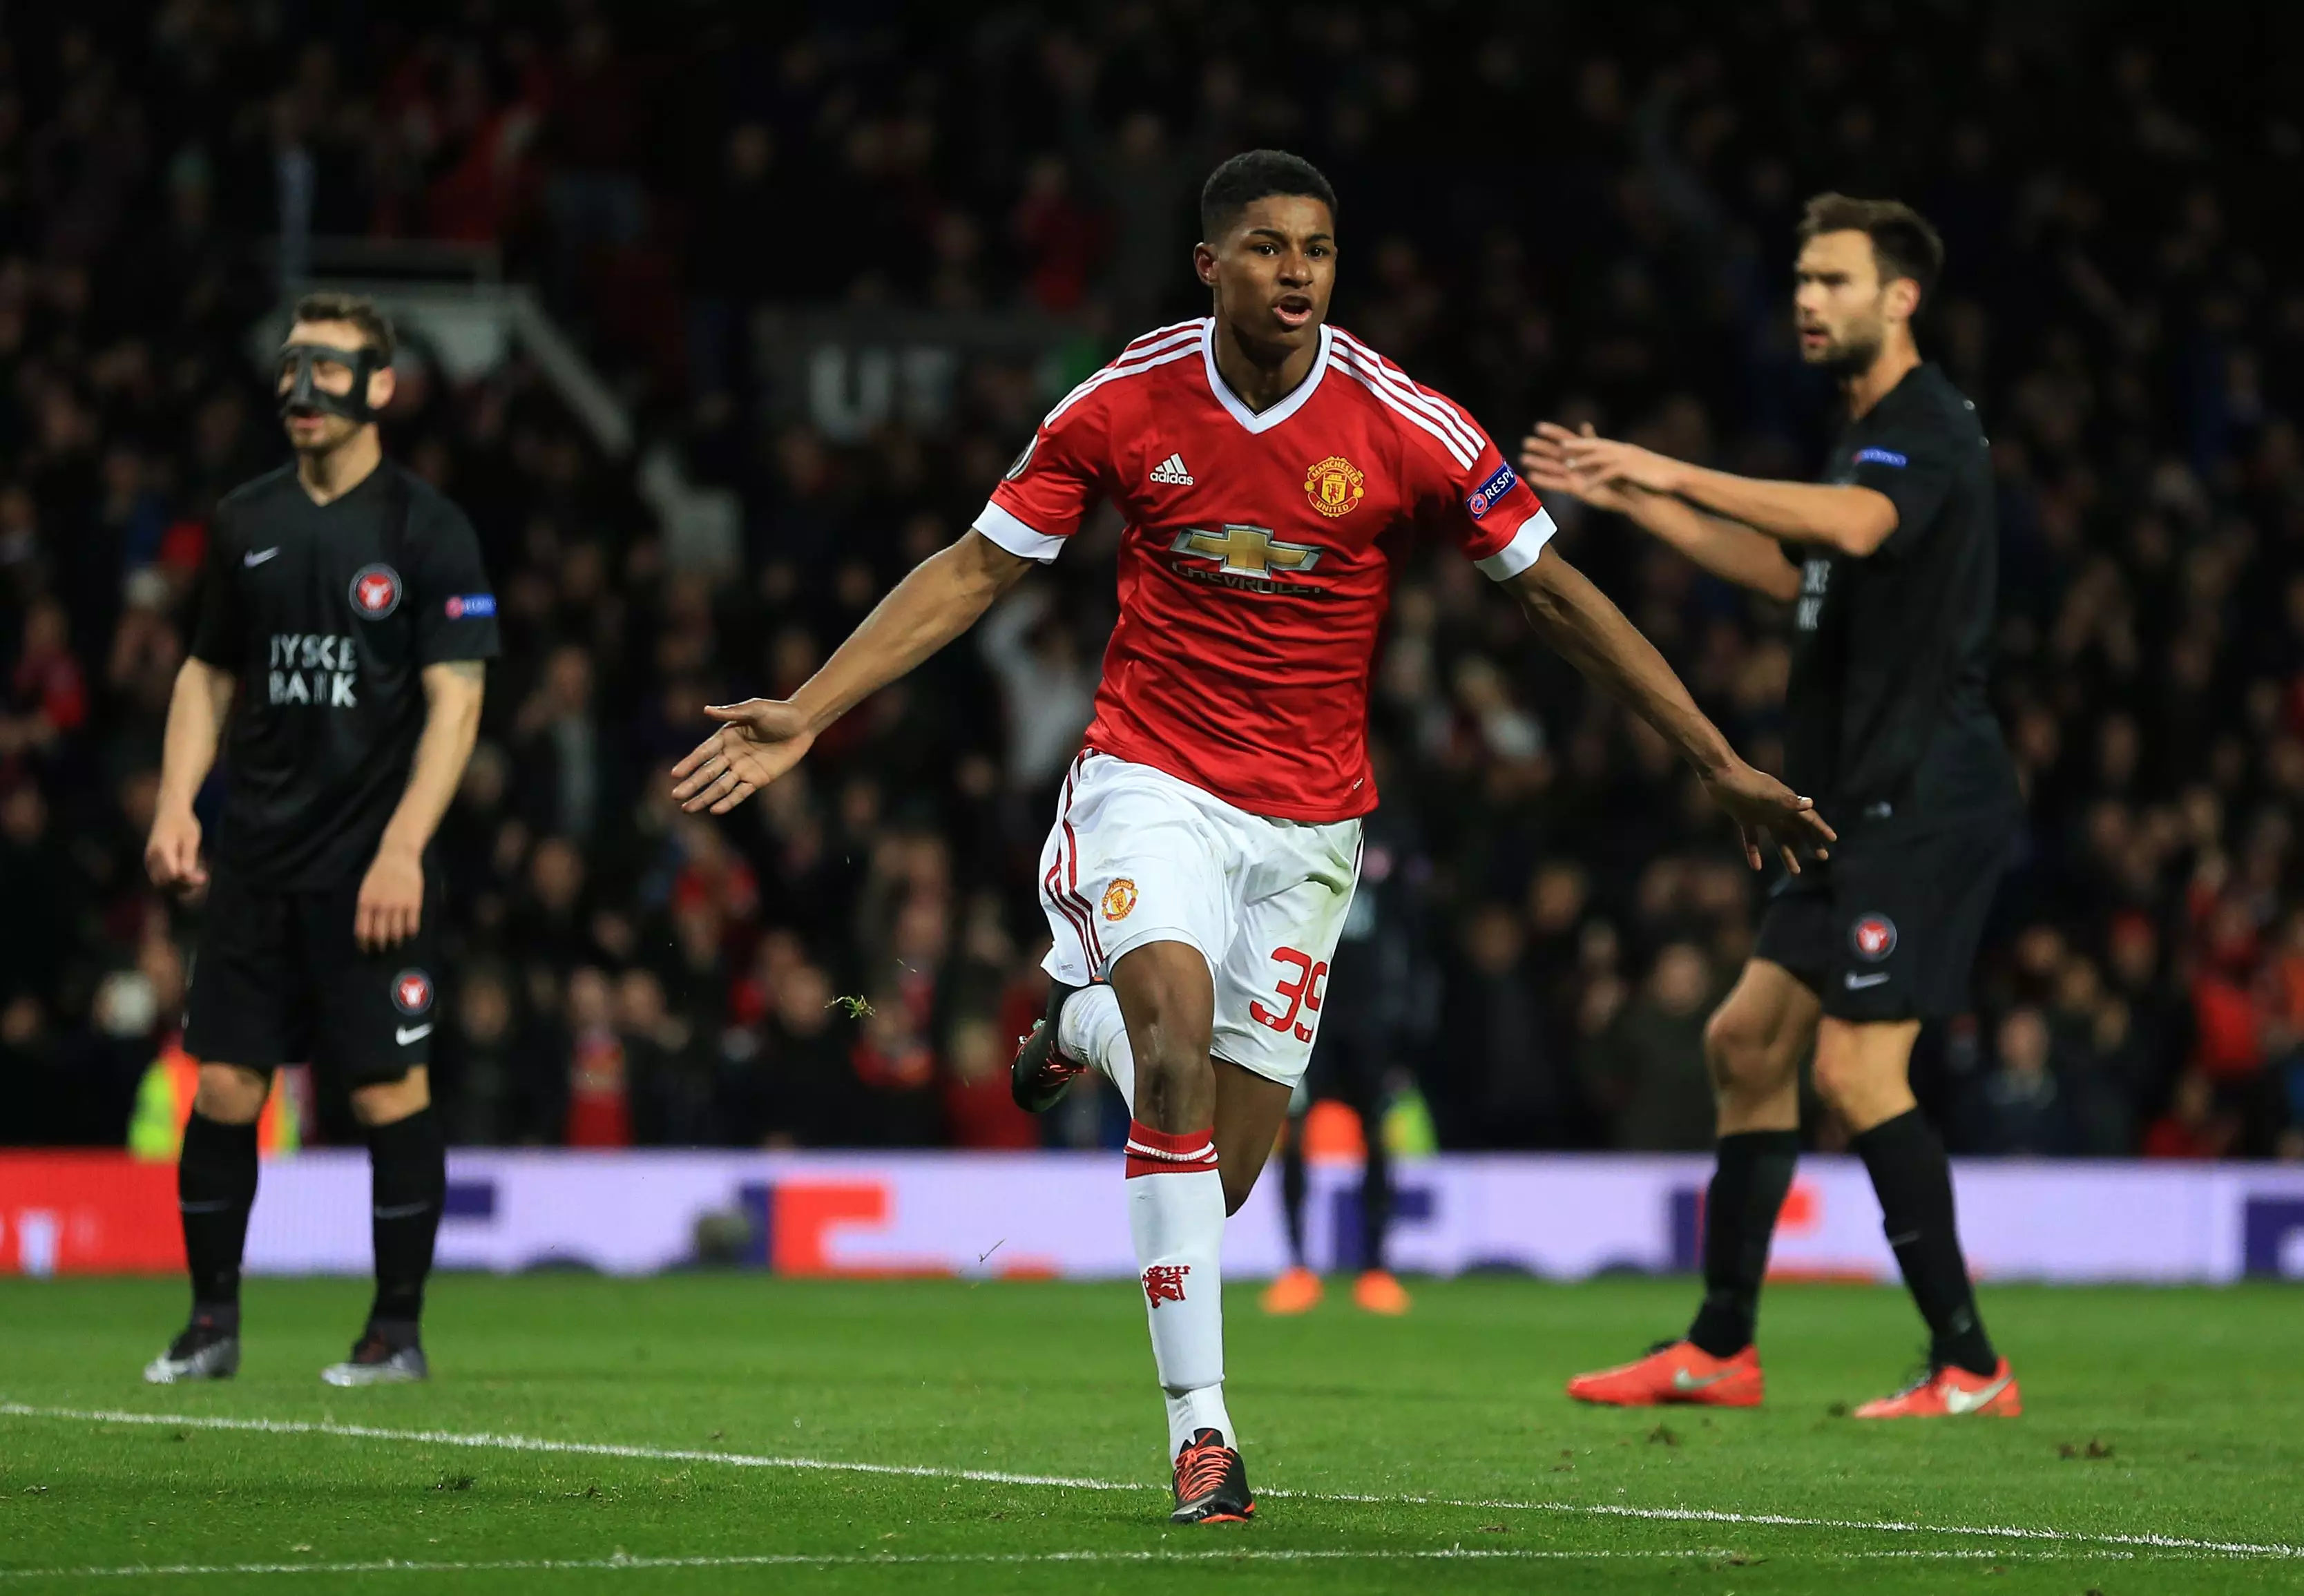 Rashford scores in one of the most incredible debuts seen. Image: PA Images.